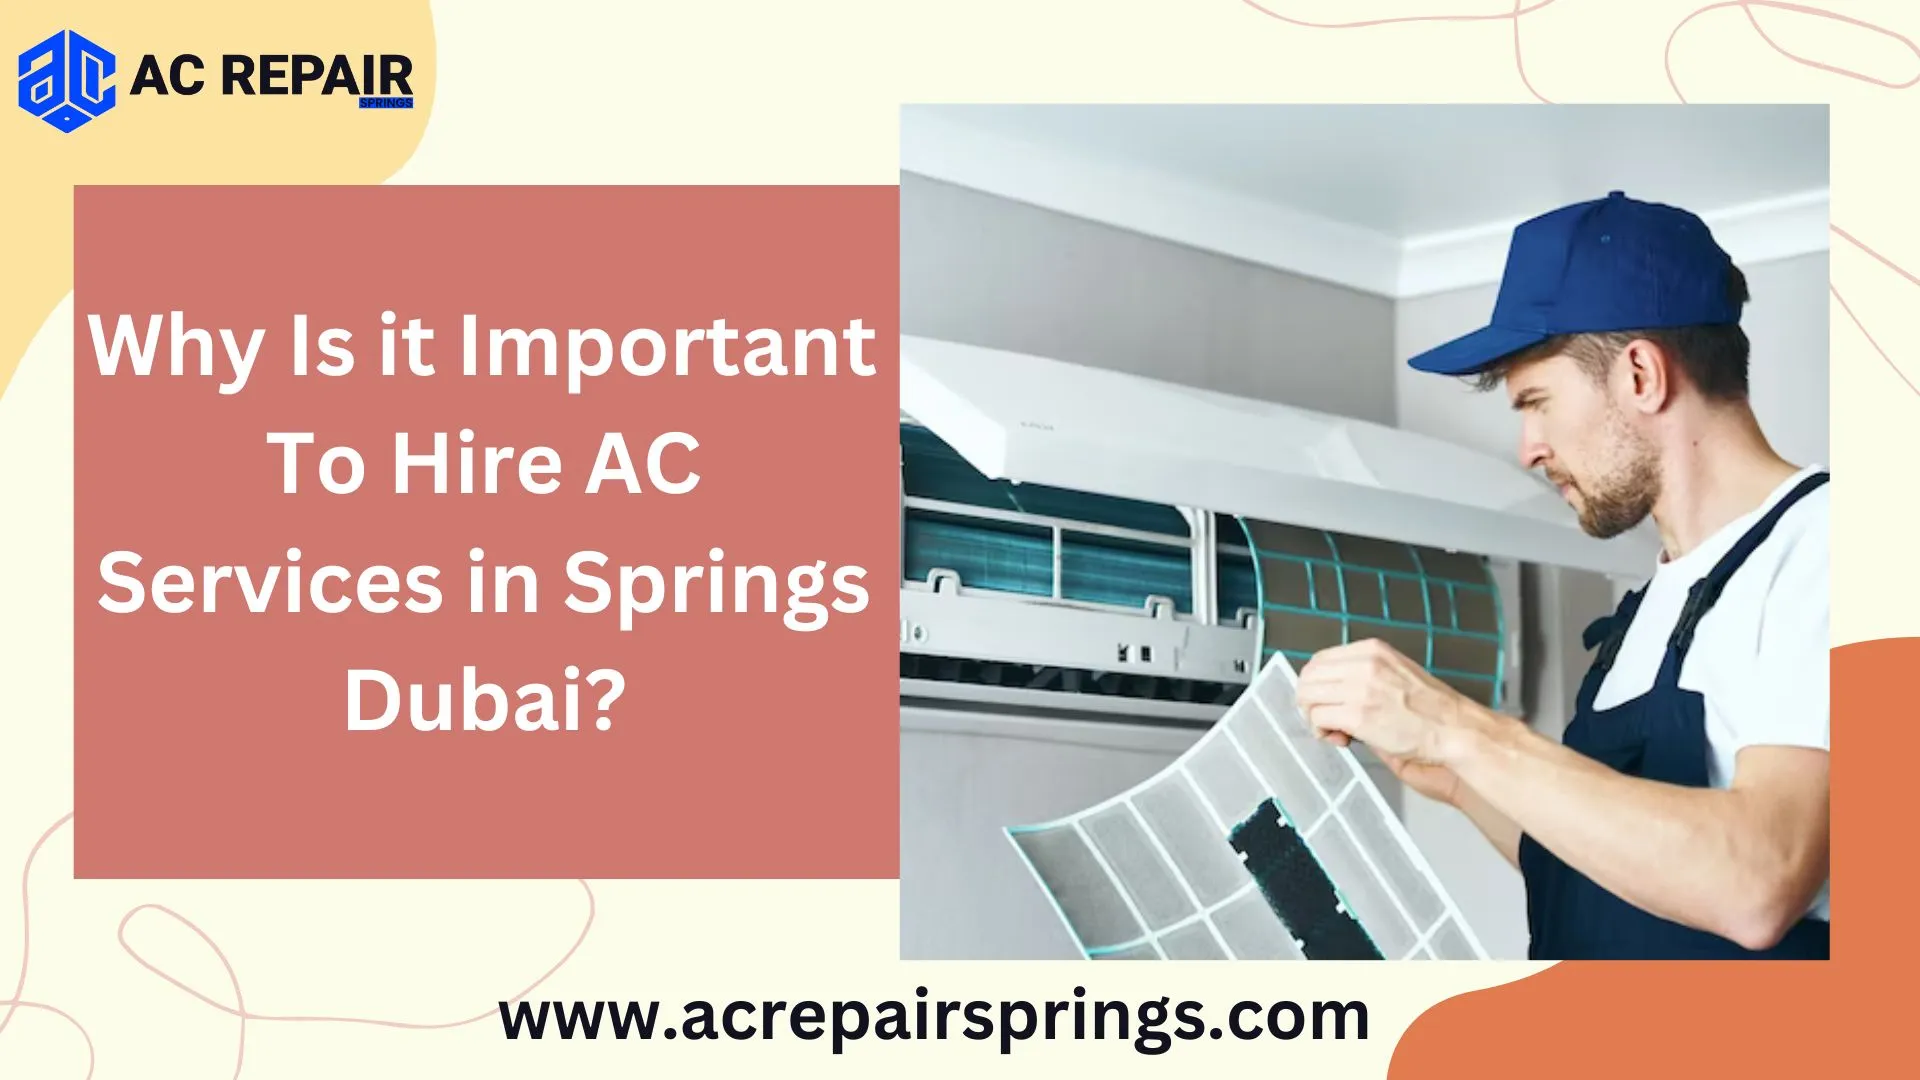 Why Is It Important To Hire An AC Expert Or AC Services In Springs, Dubai?